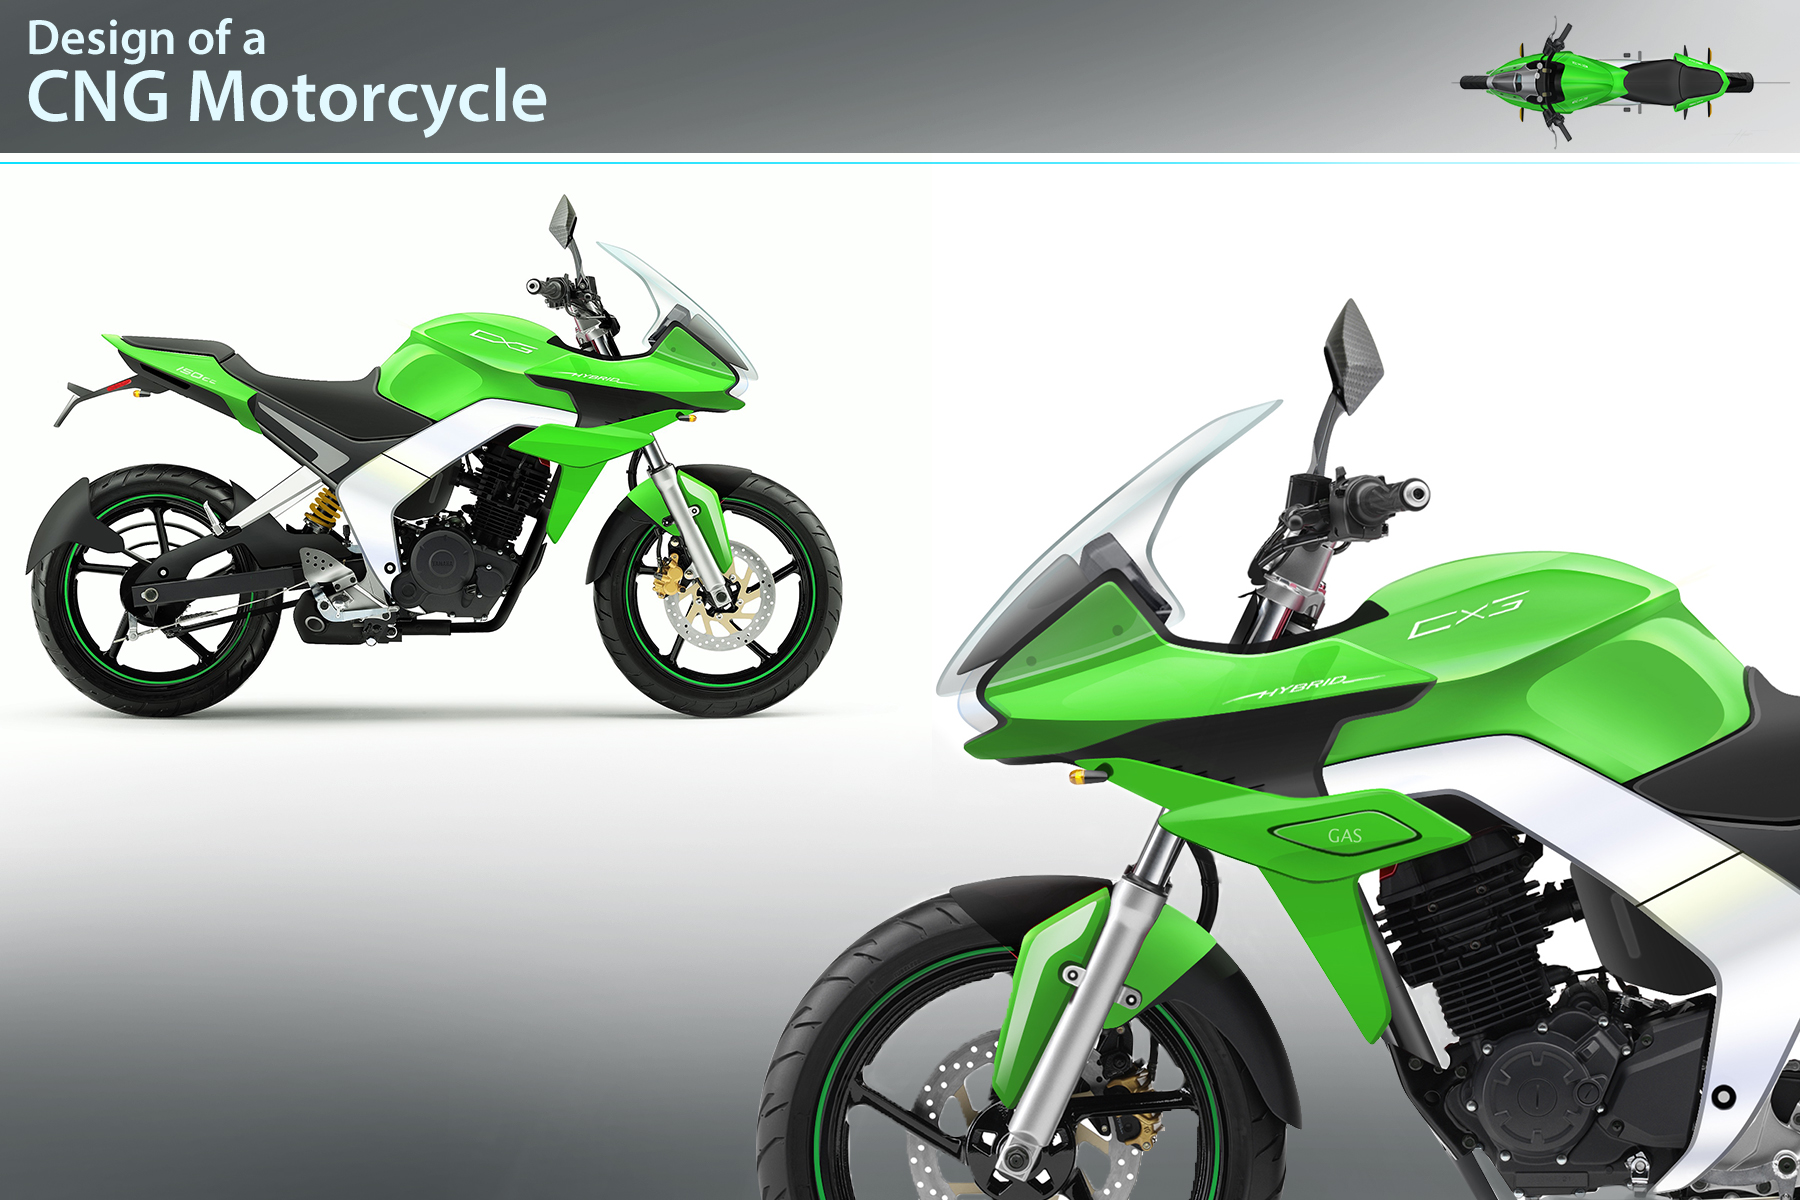 Design of a CNG Motorcycle